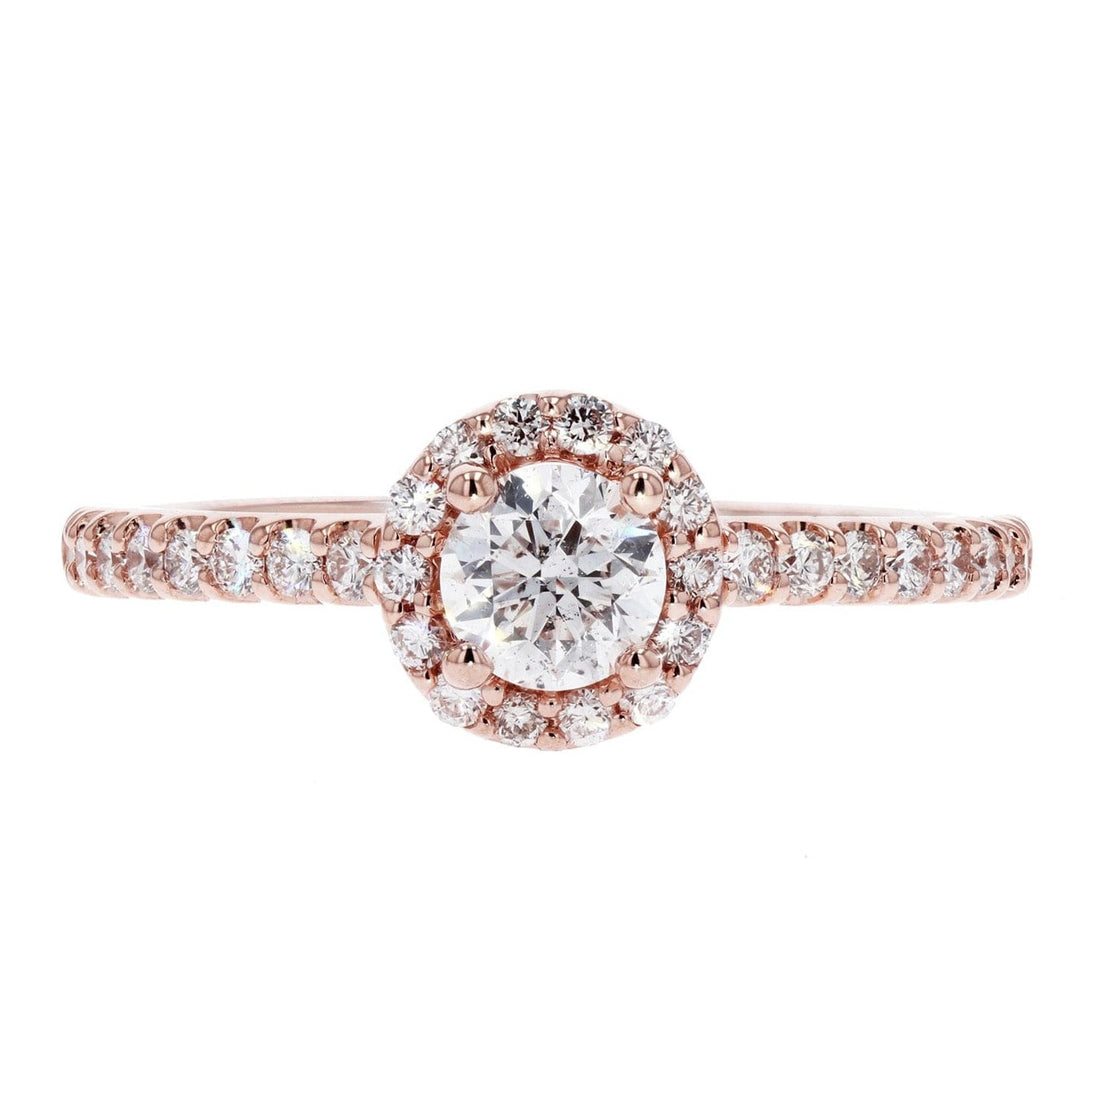 Round Brilliant Diamond Engagement Ring with a Half Round Halo - Skeie's Jewelers